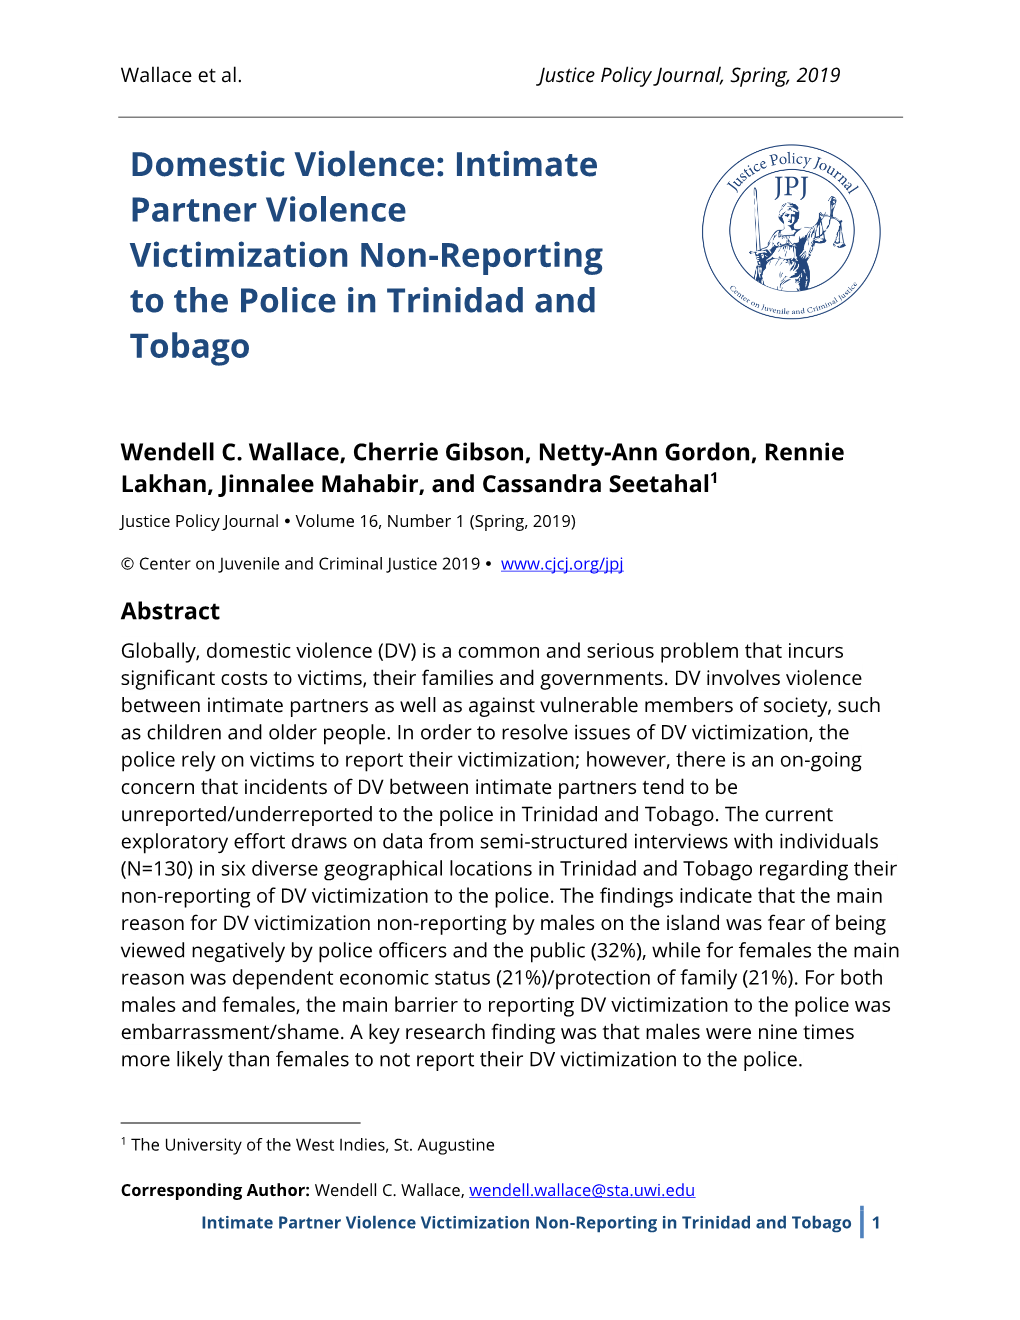 Intimate Partner Violence Victimization Non-Reporting to the Police in Trinidad and Tobago